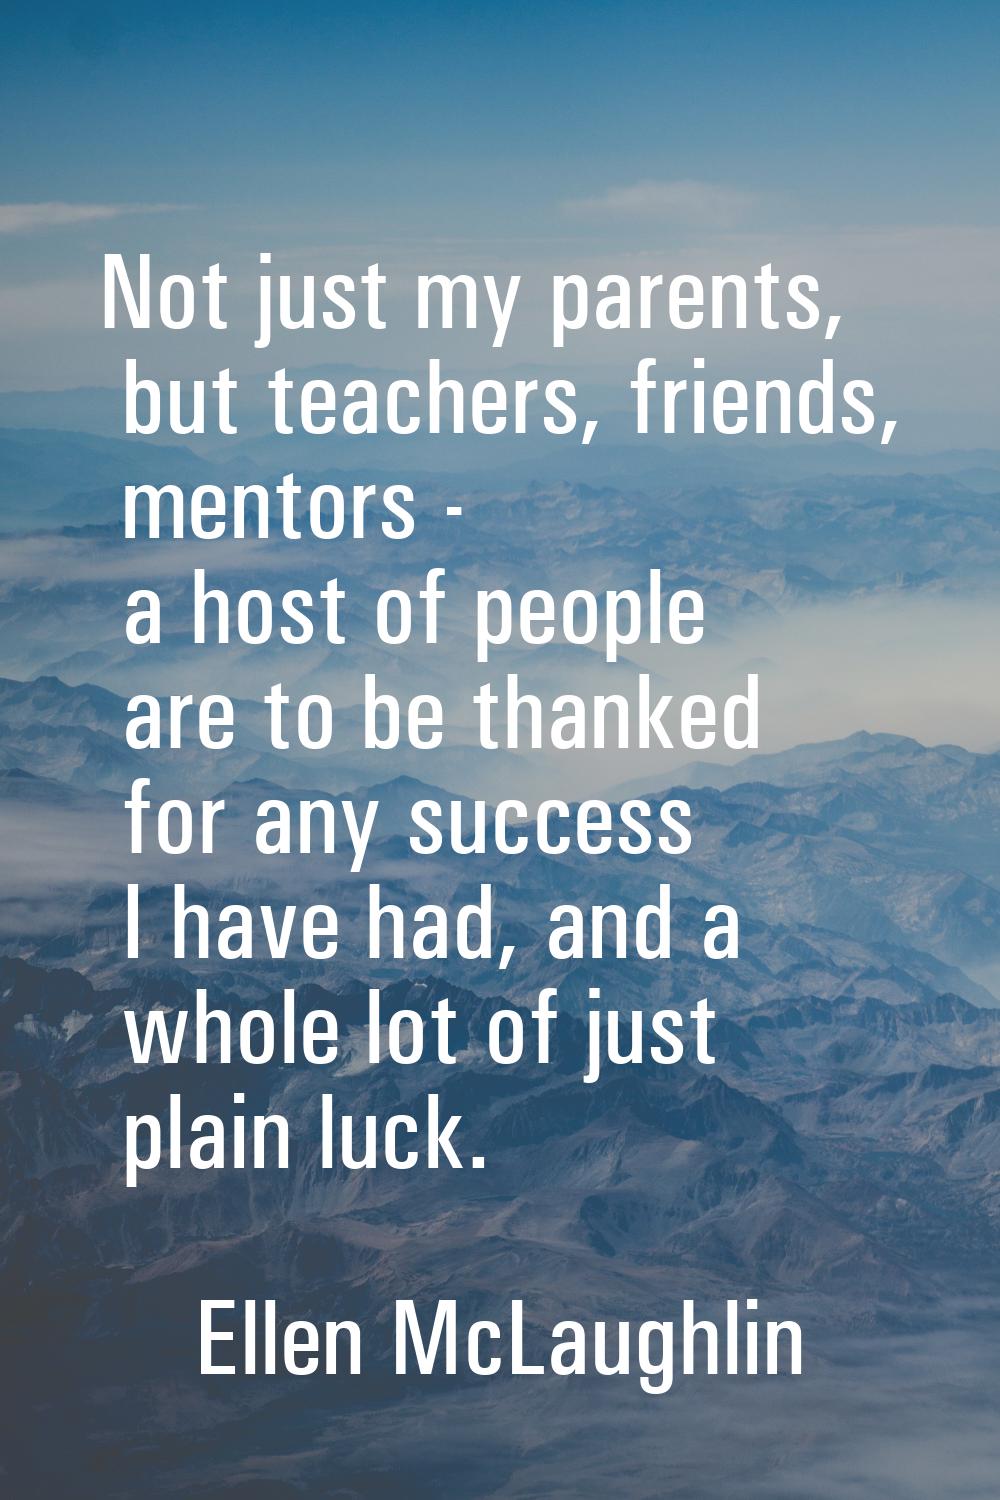 Not just my parents, but teachers, friends, mentors - a host of people are to be thanked for any su